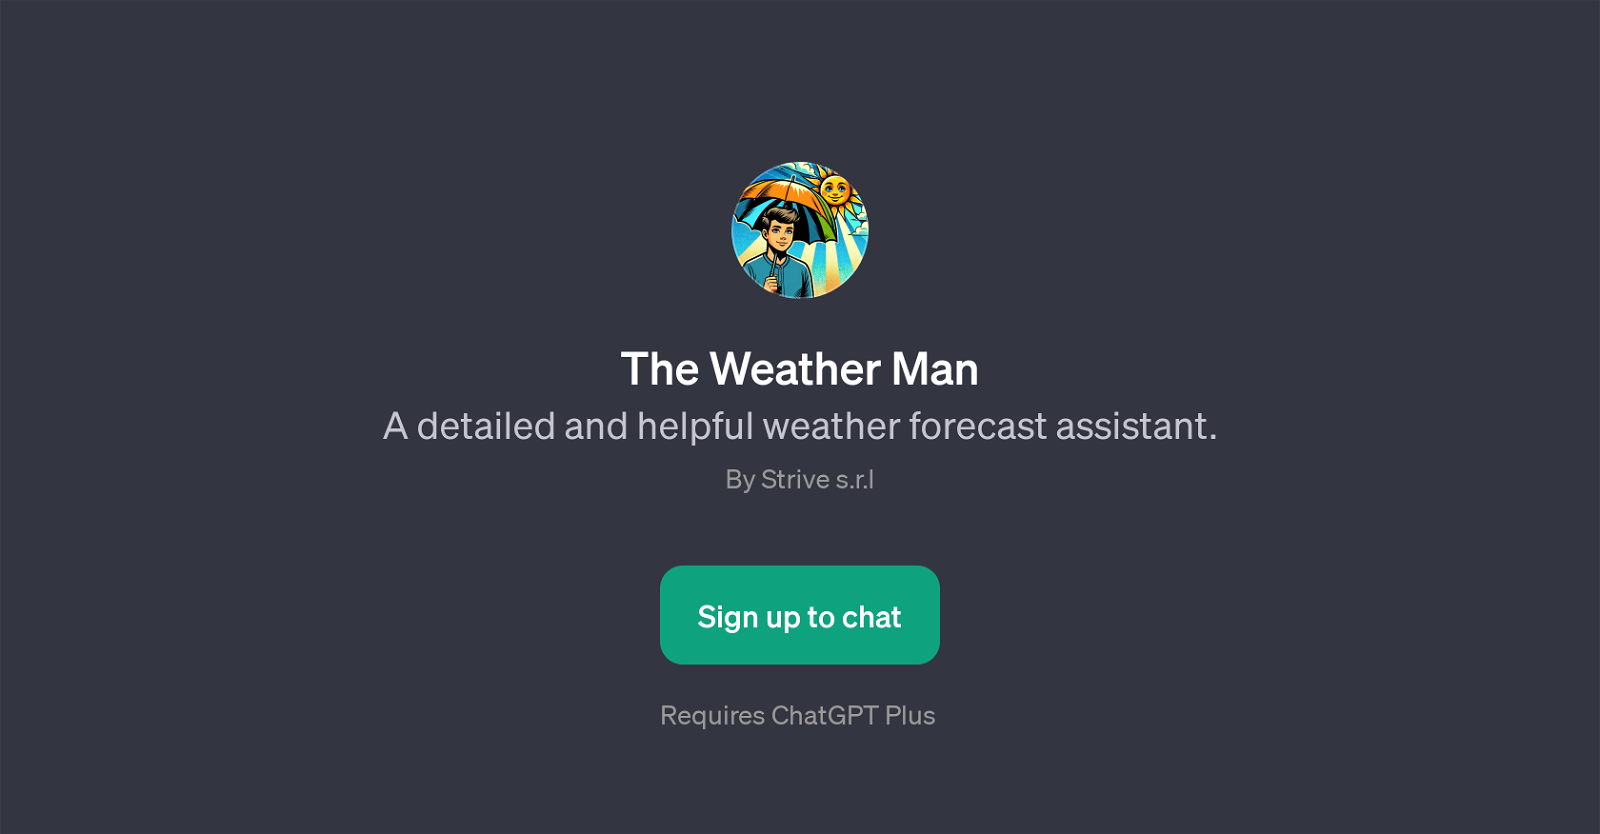 The Weather Man website